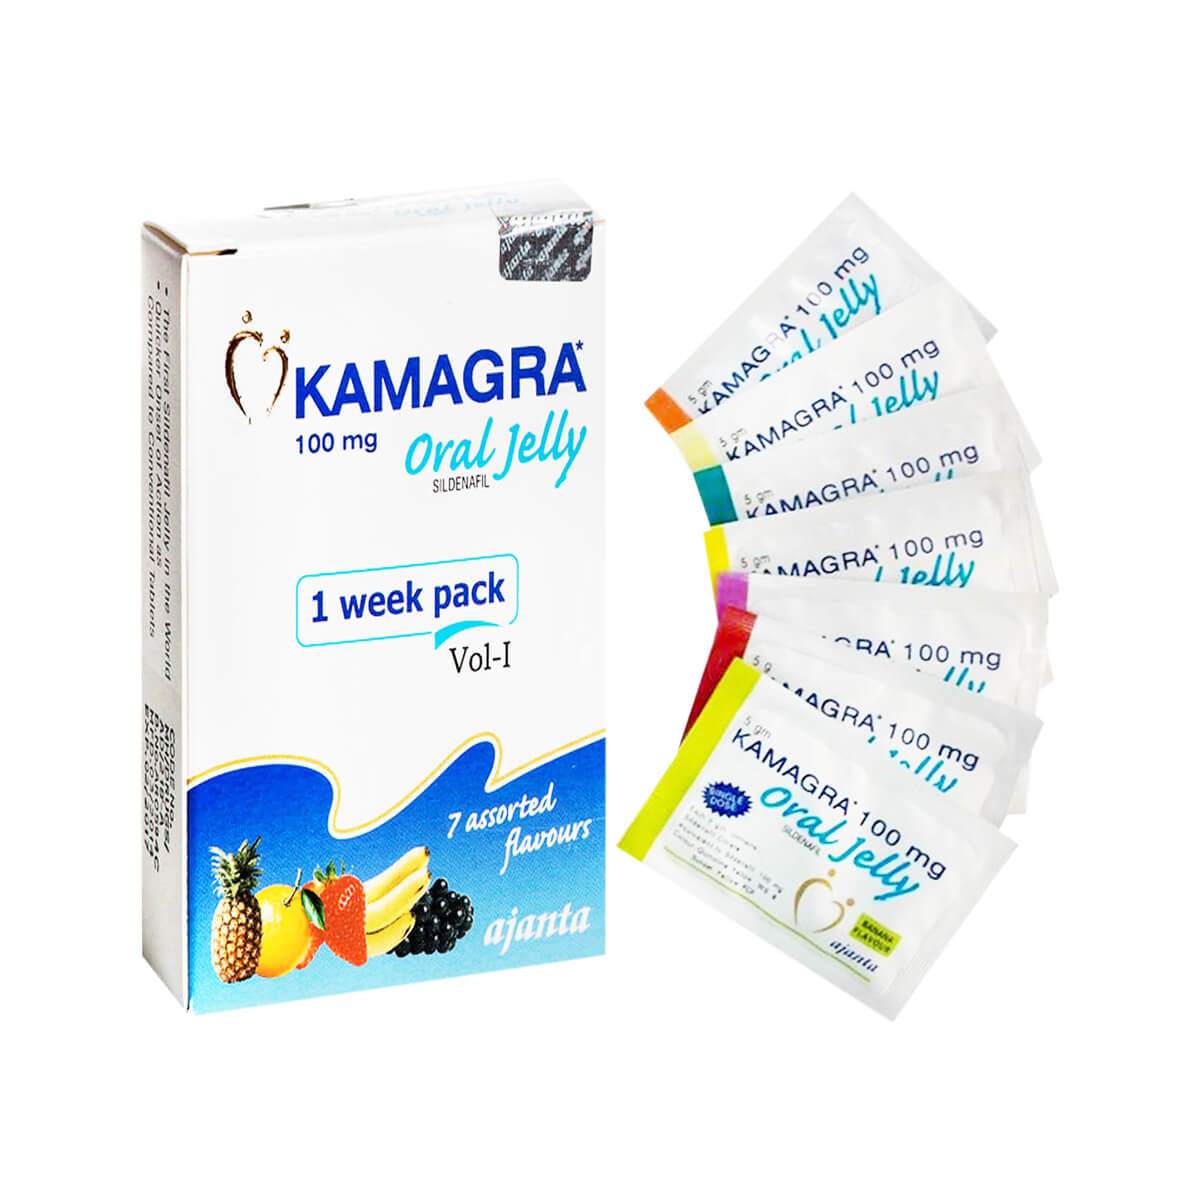 kamagra oral jelly where to buy